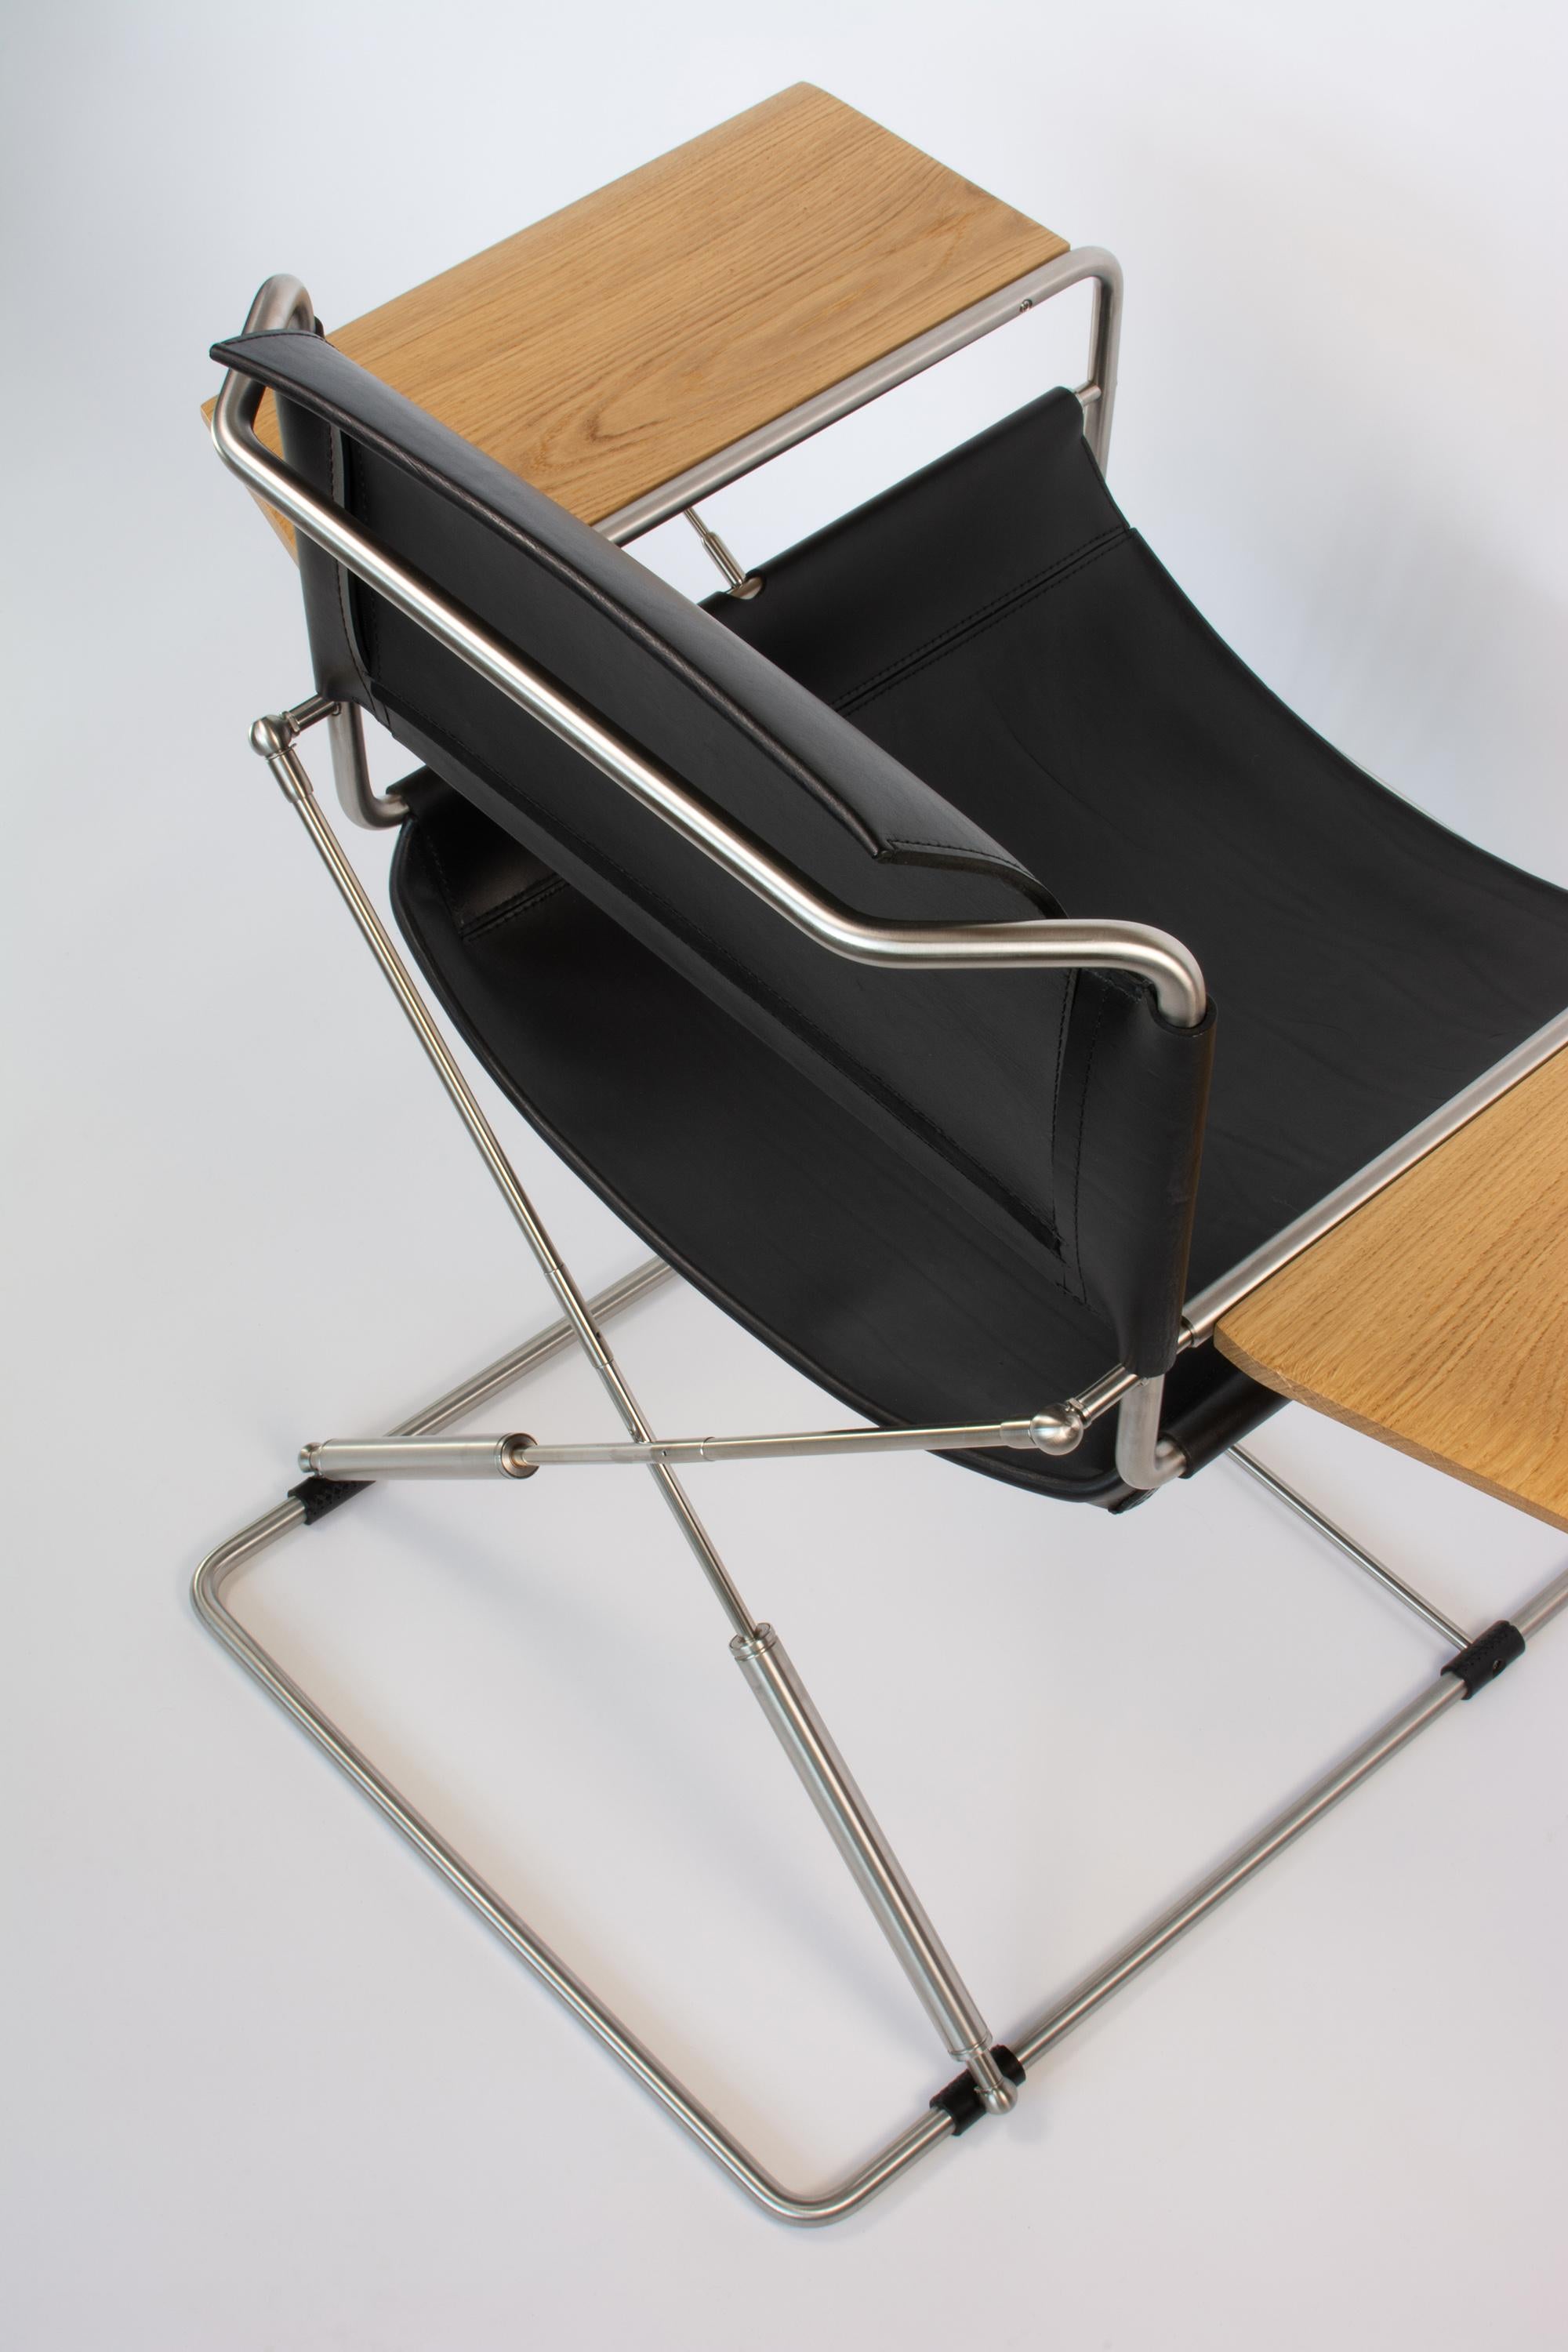 Stainless Steel Bauhaus inspired Pneumatic Chair - handcrafted with the finest tuscan leather